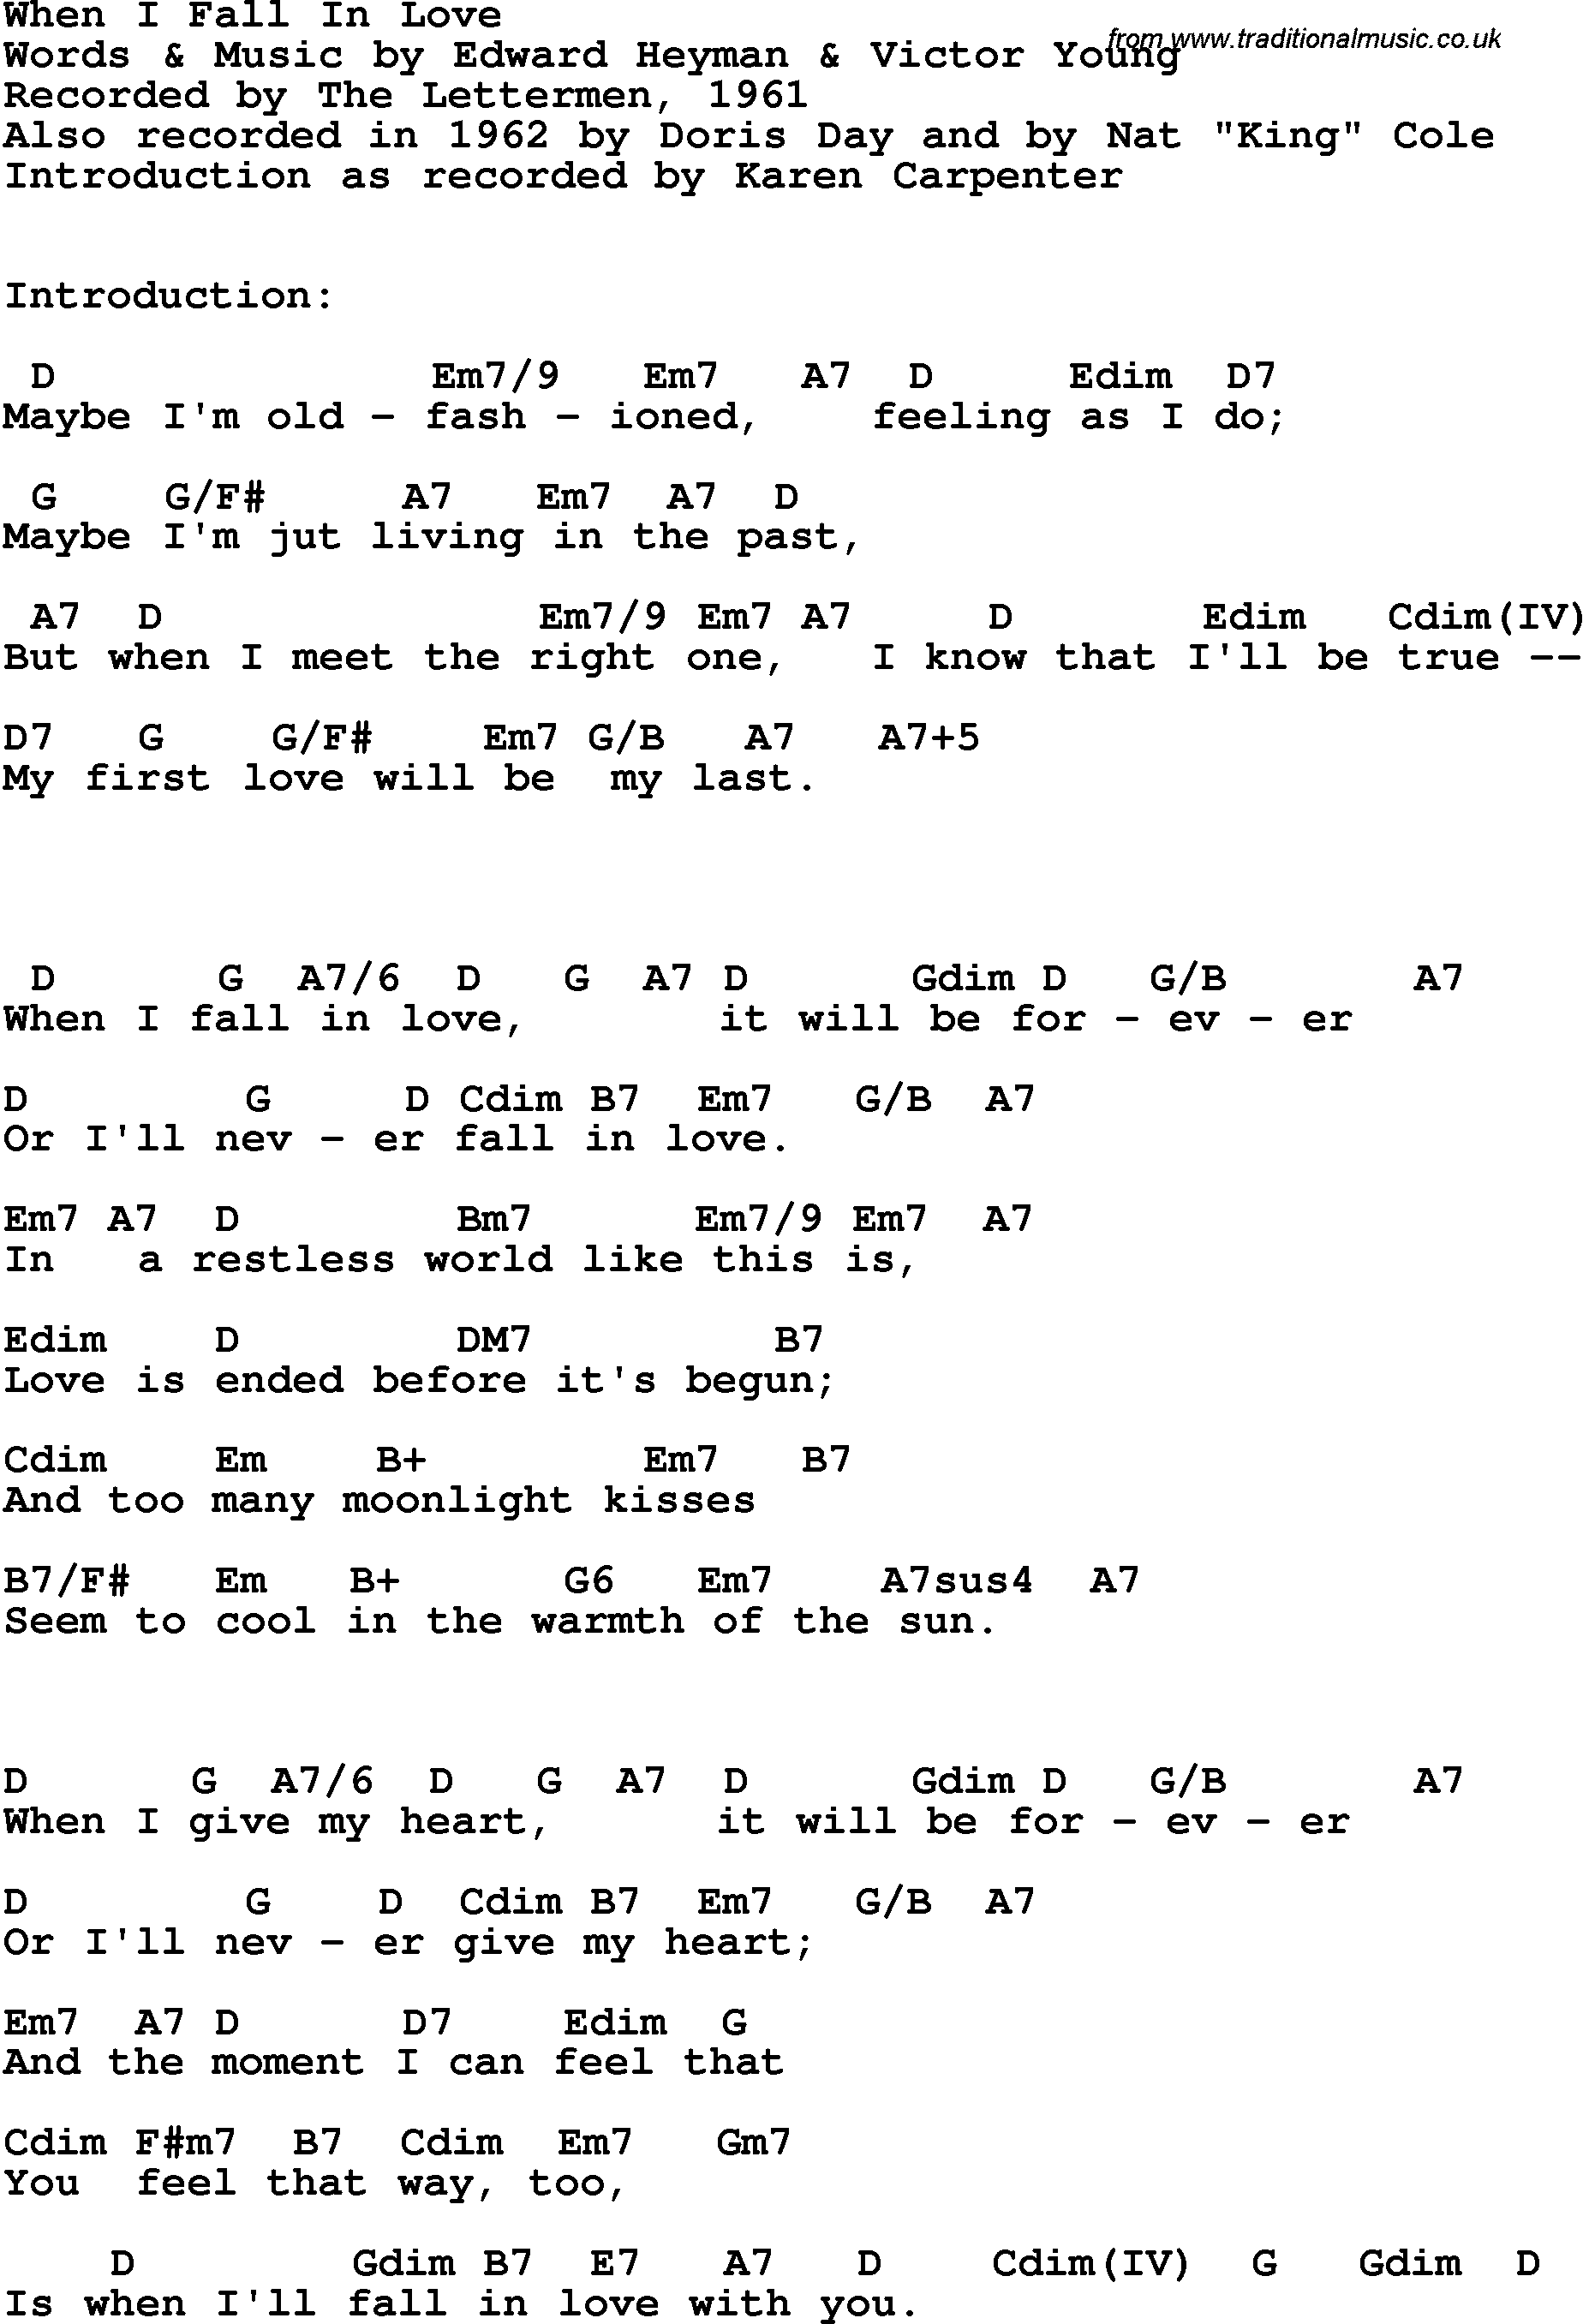 Song Lyrics with guitar chords for When I Fall In Love - The Lettermen, 1961